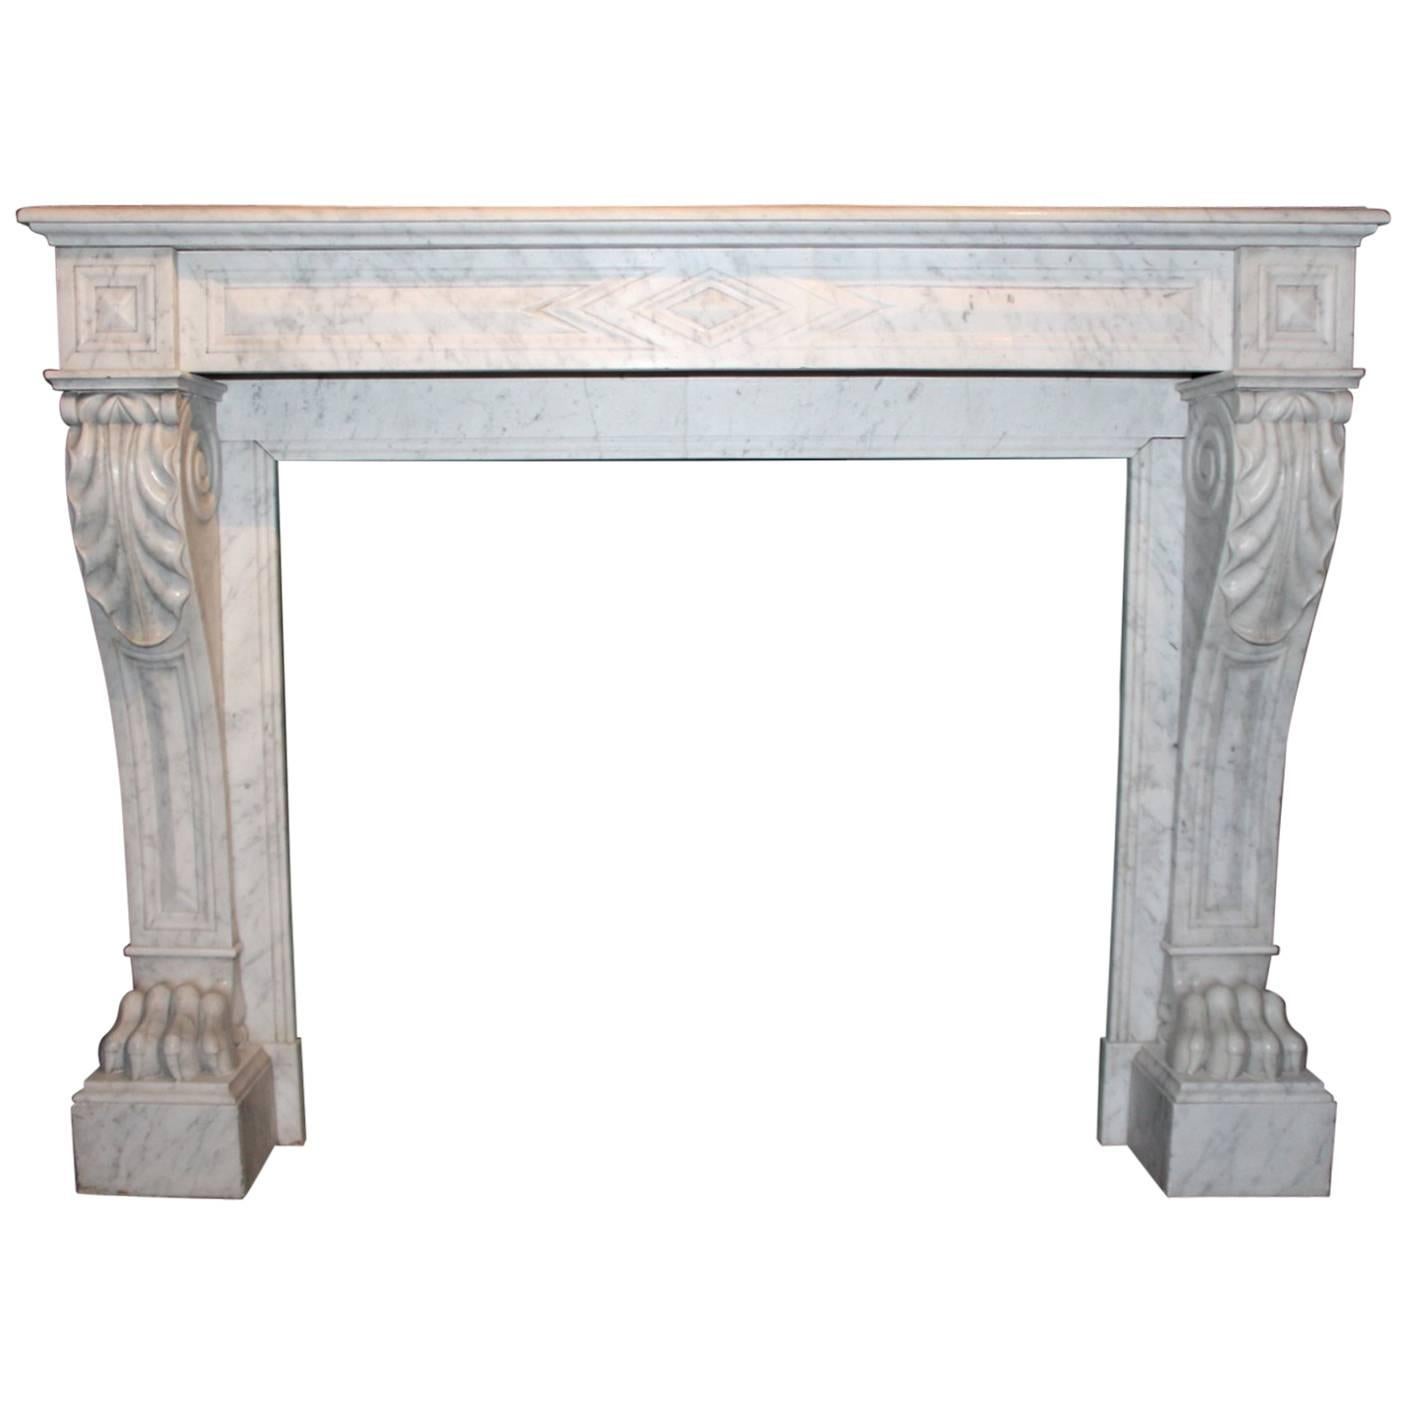 19th Century Marble Antique Fireplace mantel